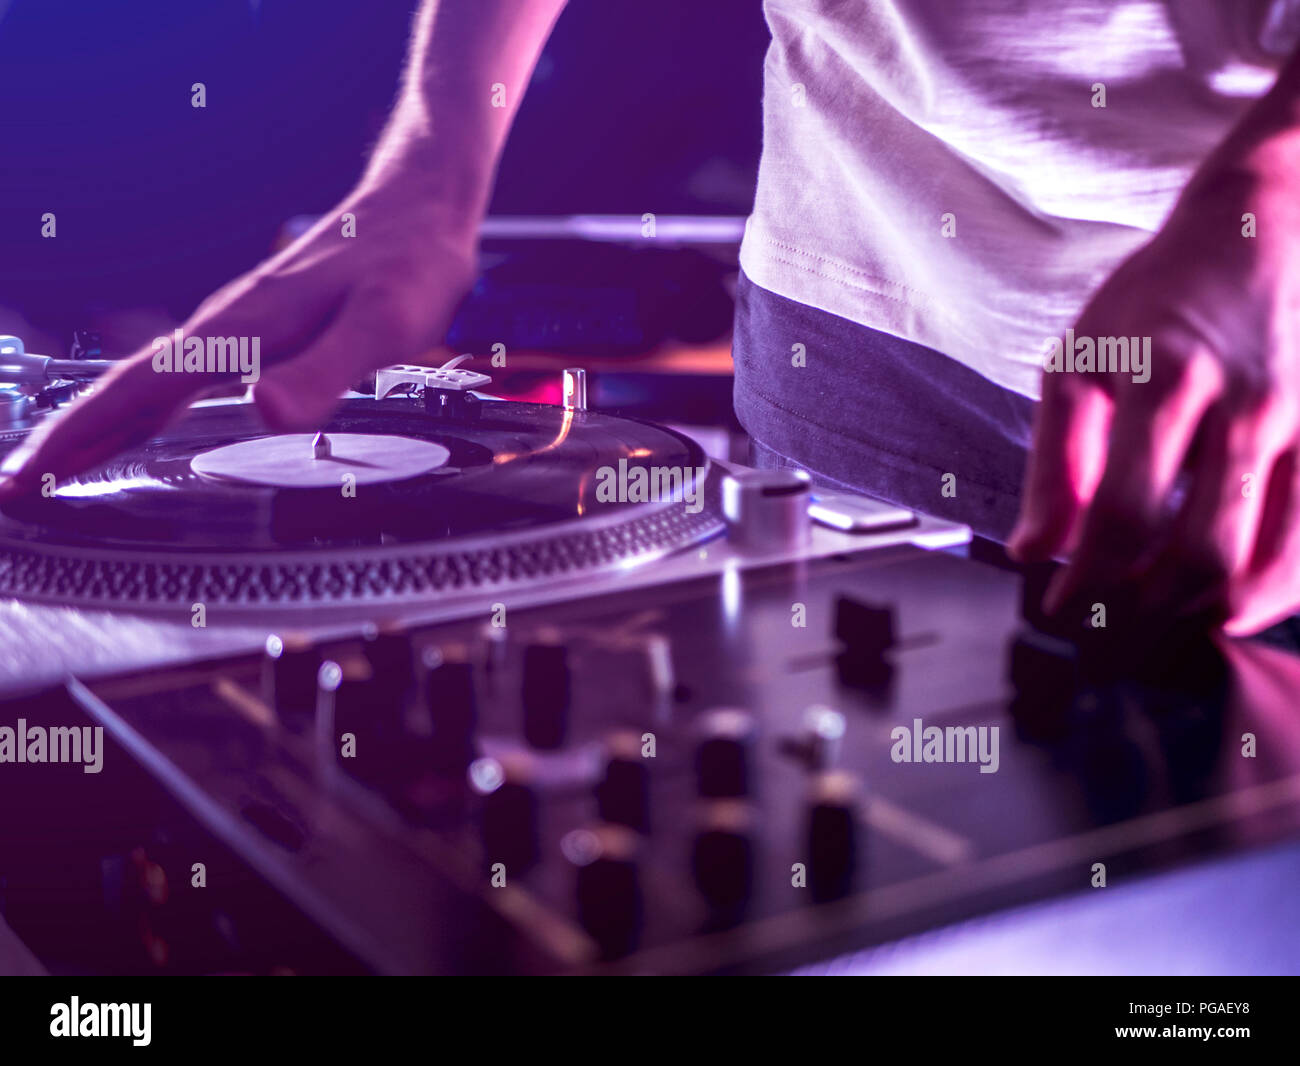 close up dj hand play music on turntable record setup at home party tomed vintage look Stock Photo